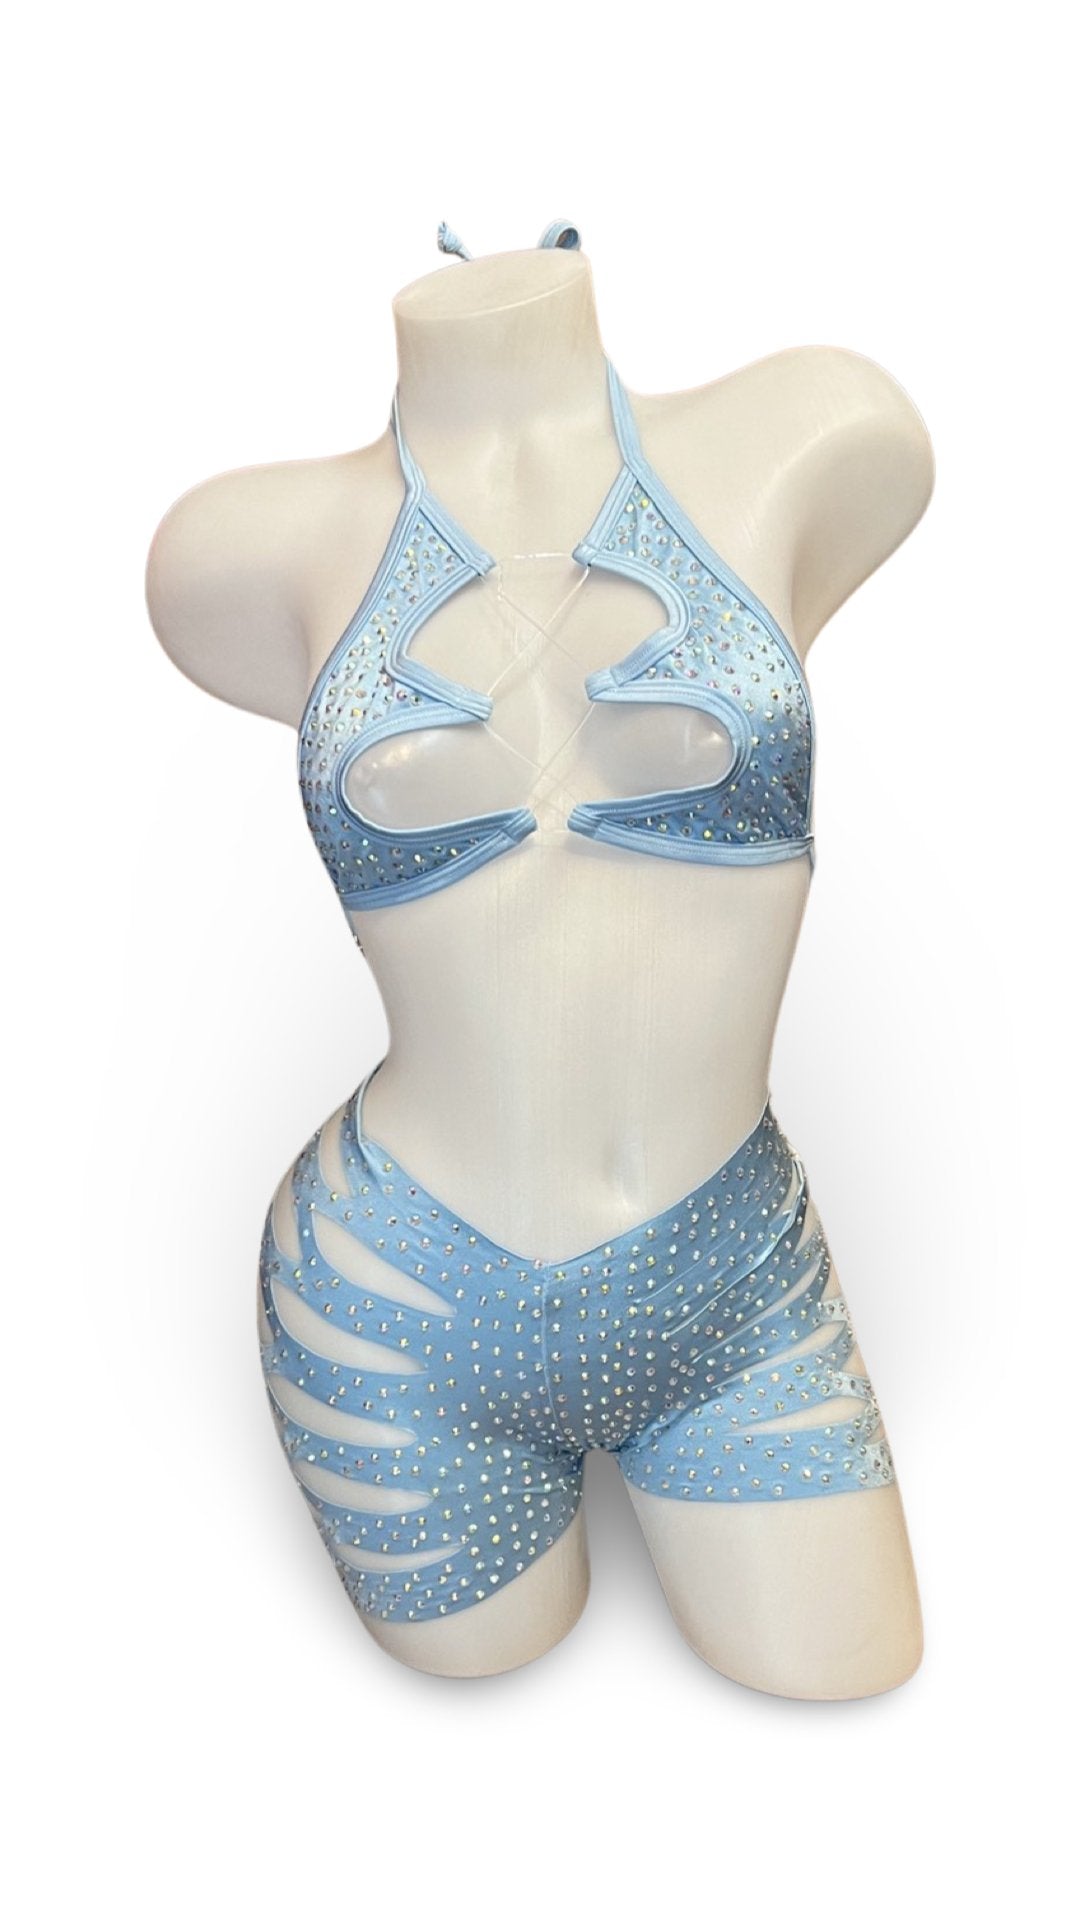 Rhinestone Halter Top and Cut Out Short Set Baby Blue - Model Express VancouverBikini